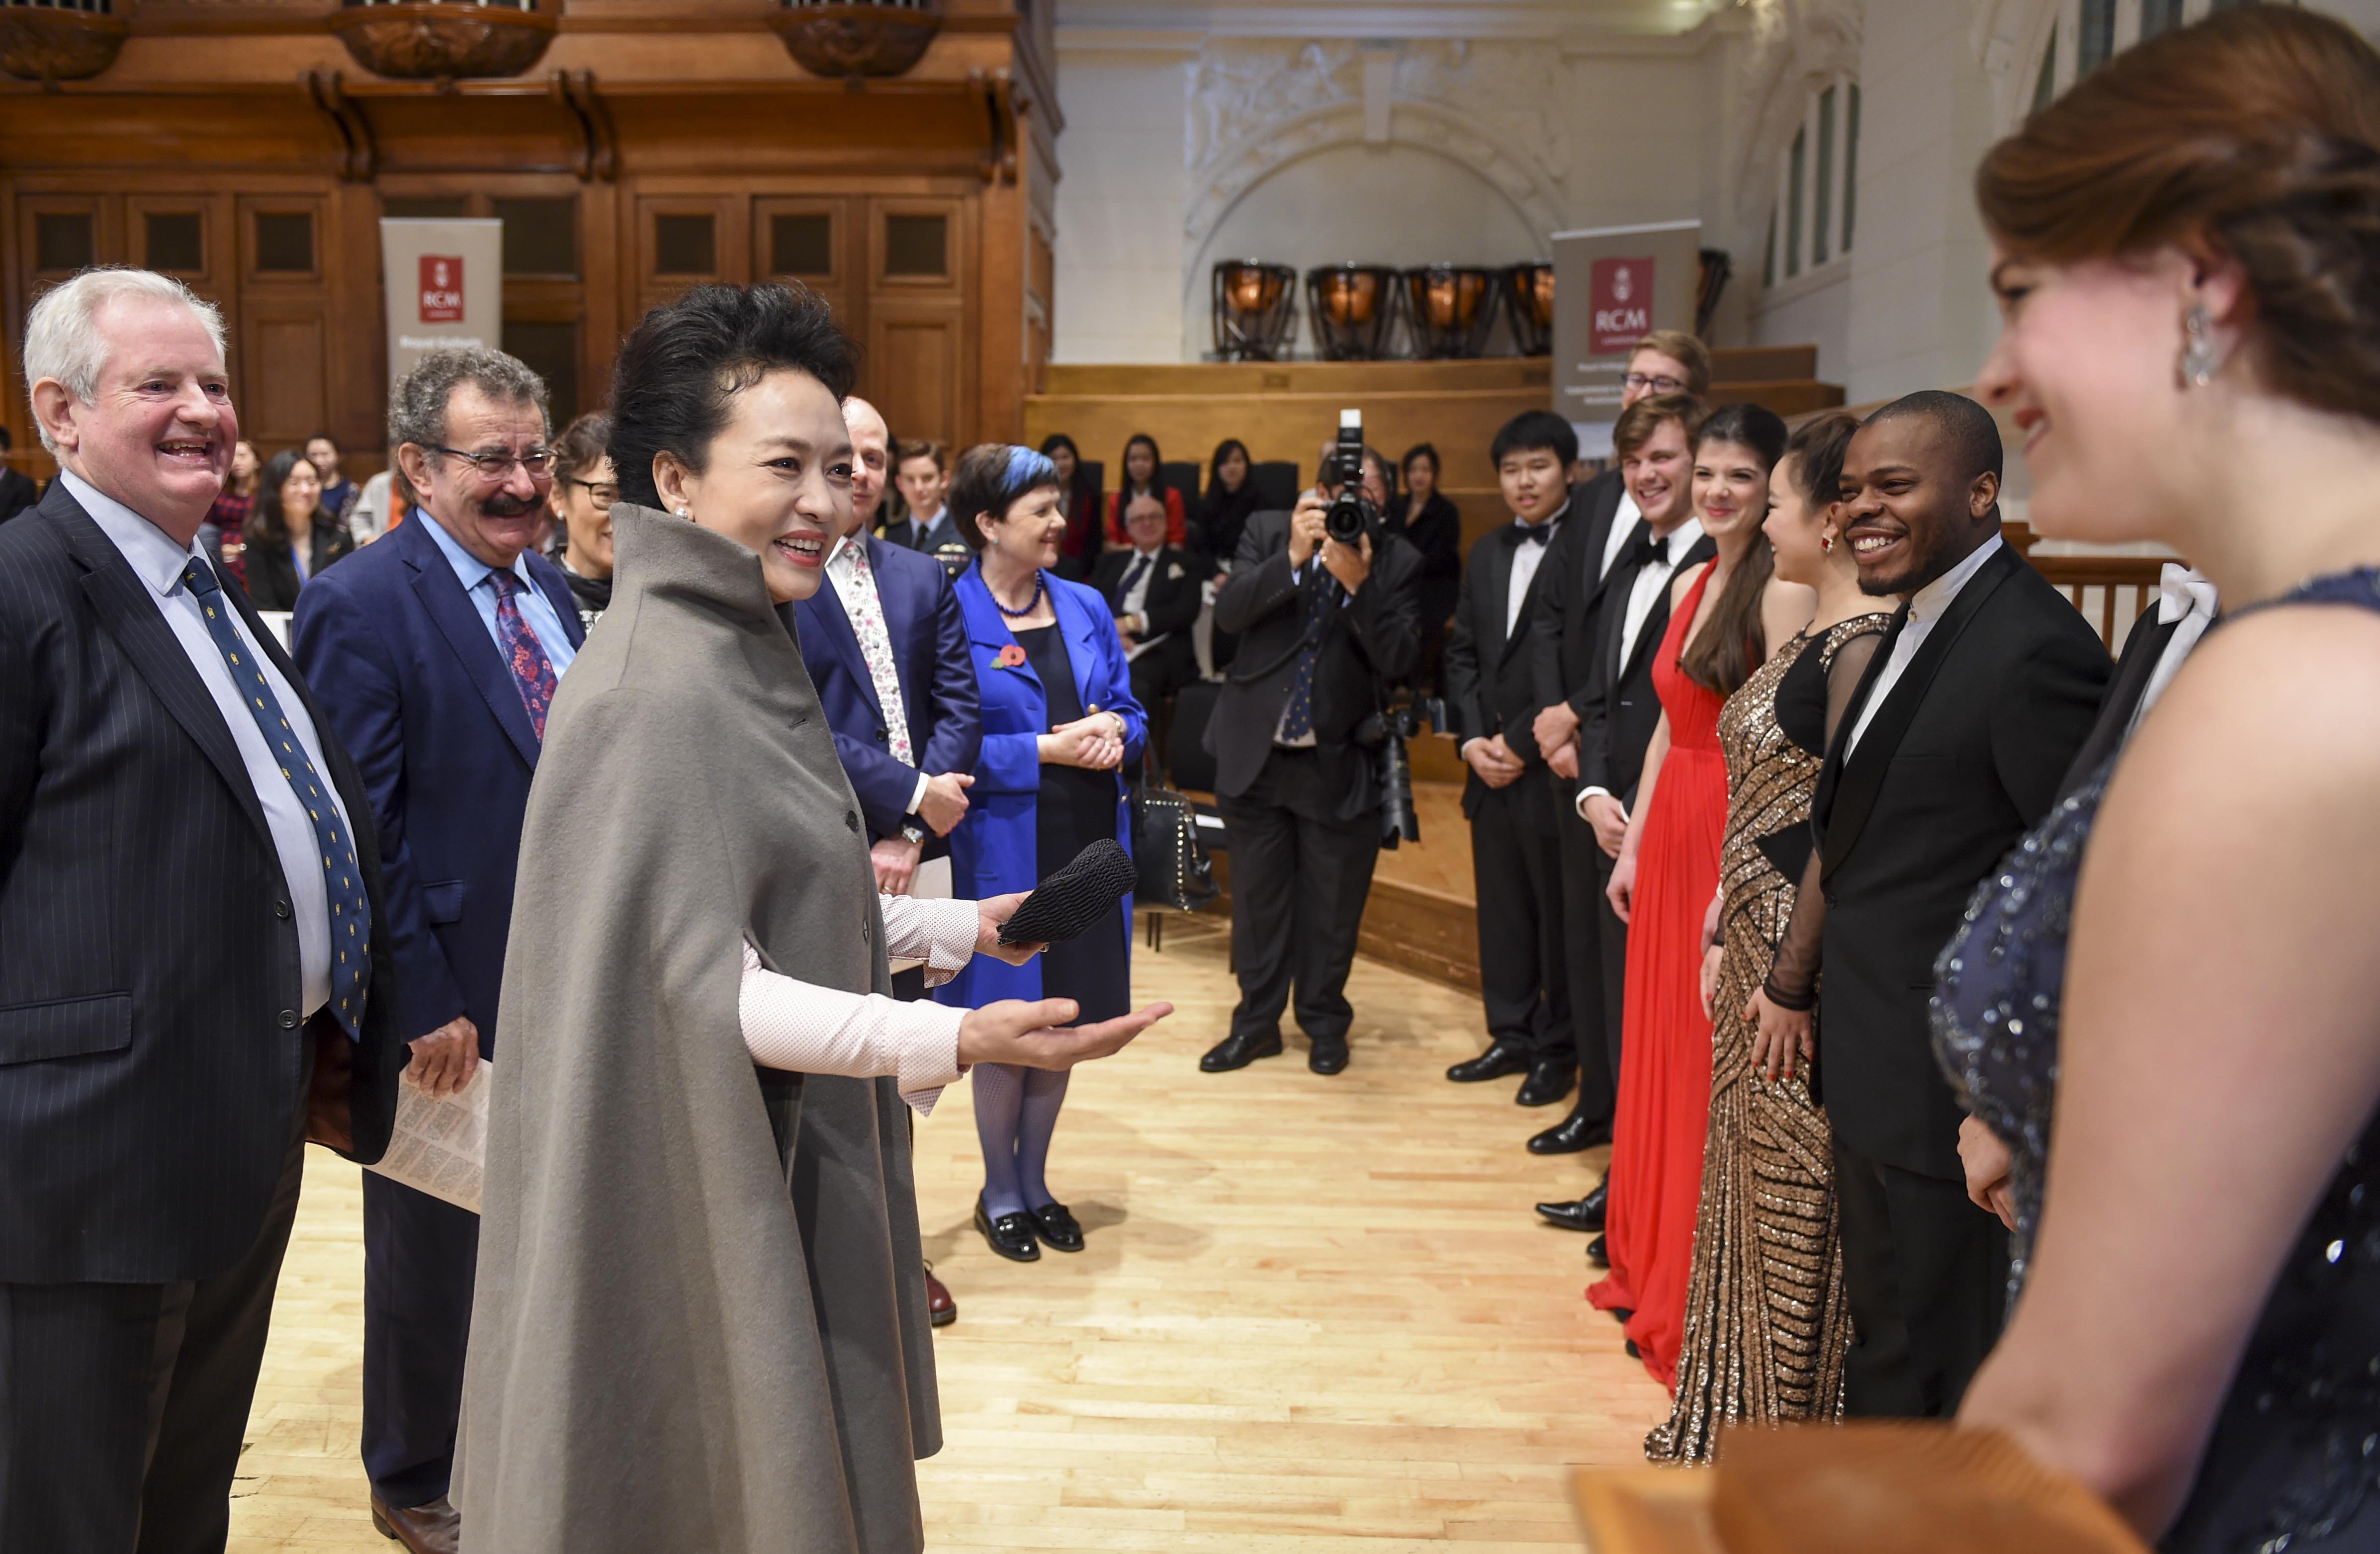 Peng Liyuan pictured with students at the Royal College of Music in London. Photo: Xinhua